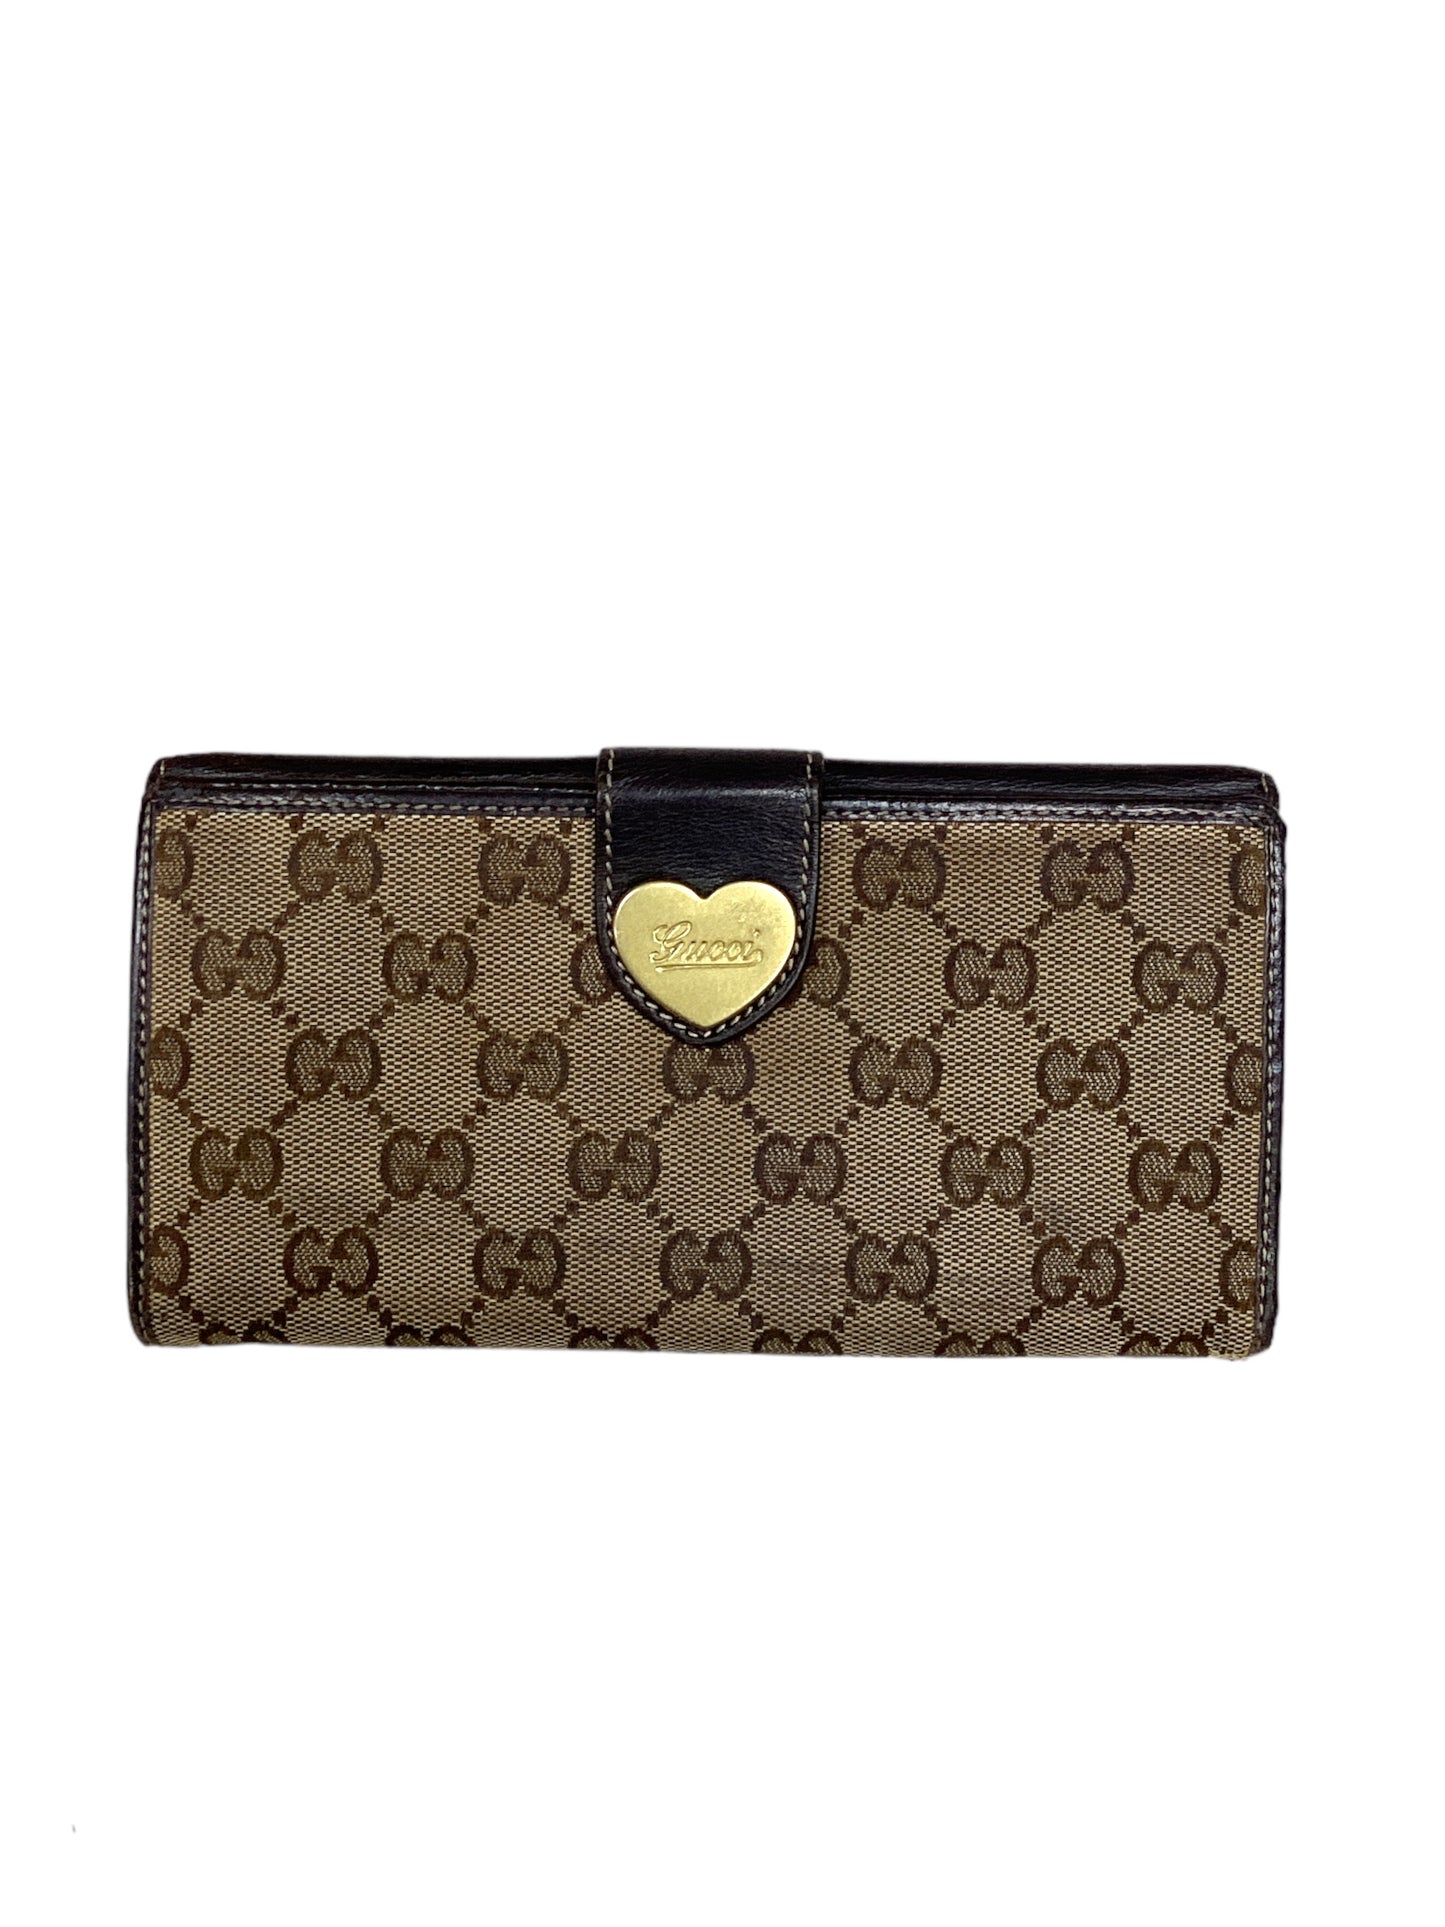 Wallet Designer By Gucci  Size: Small